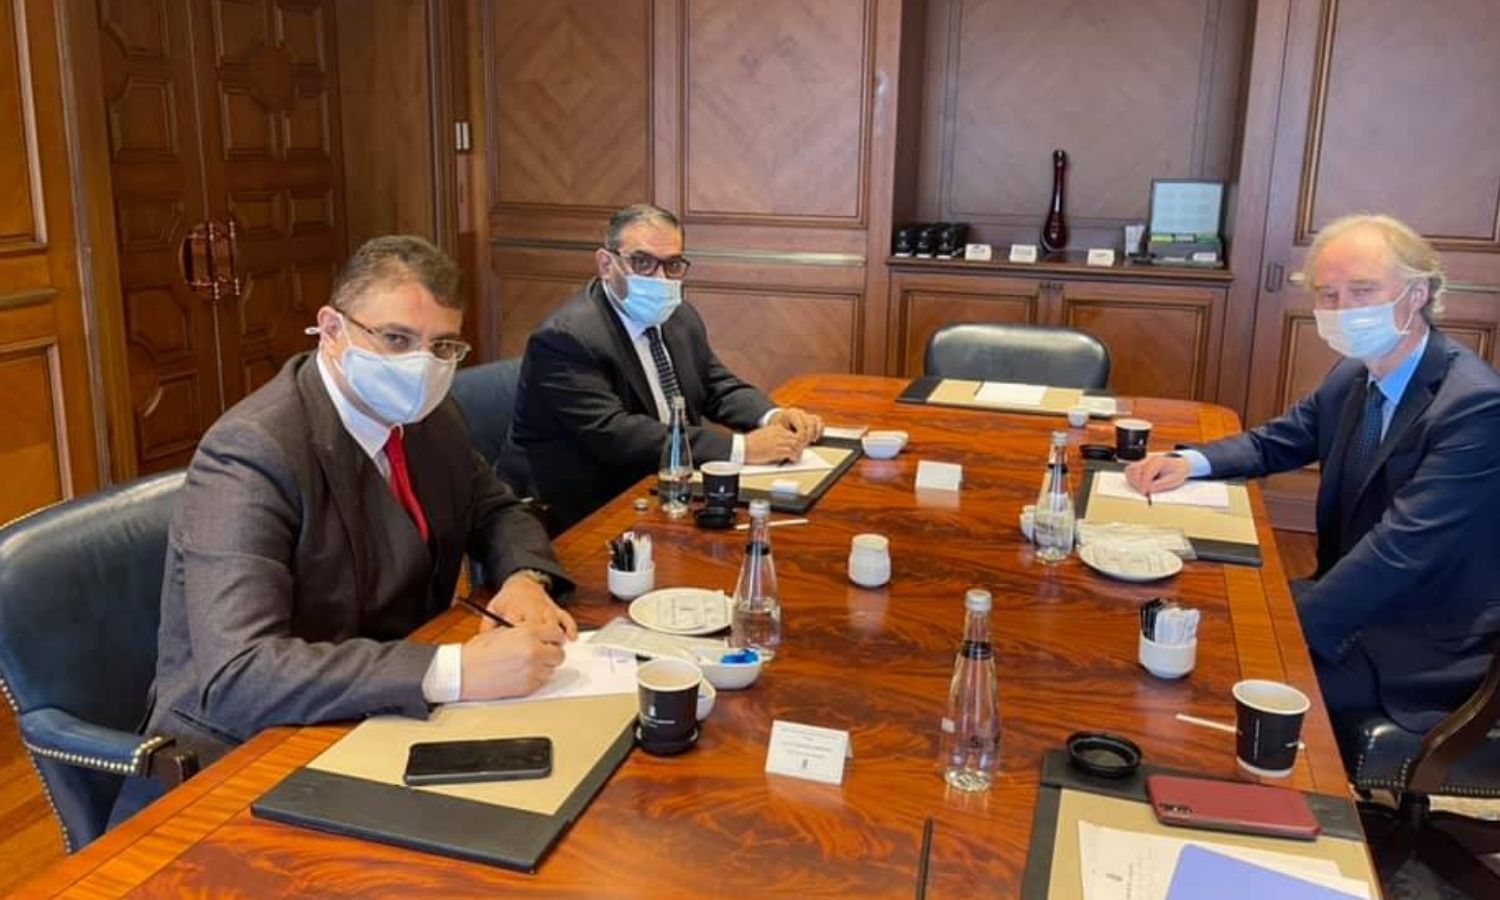 Anas al-Abdah, head of the Syrian Negotiations Committee, during his meeting with the UN envoy, Geir Pedersen, to discuss ways to activate Resolution 2254 - 2 March 2021 (Syrian National Coalition)